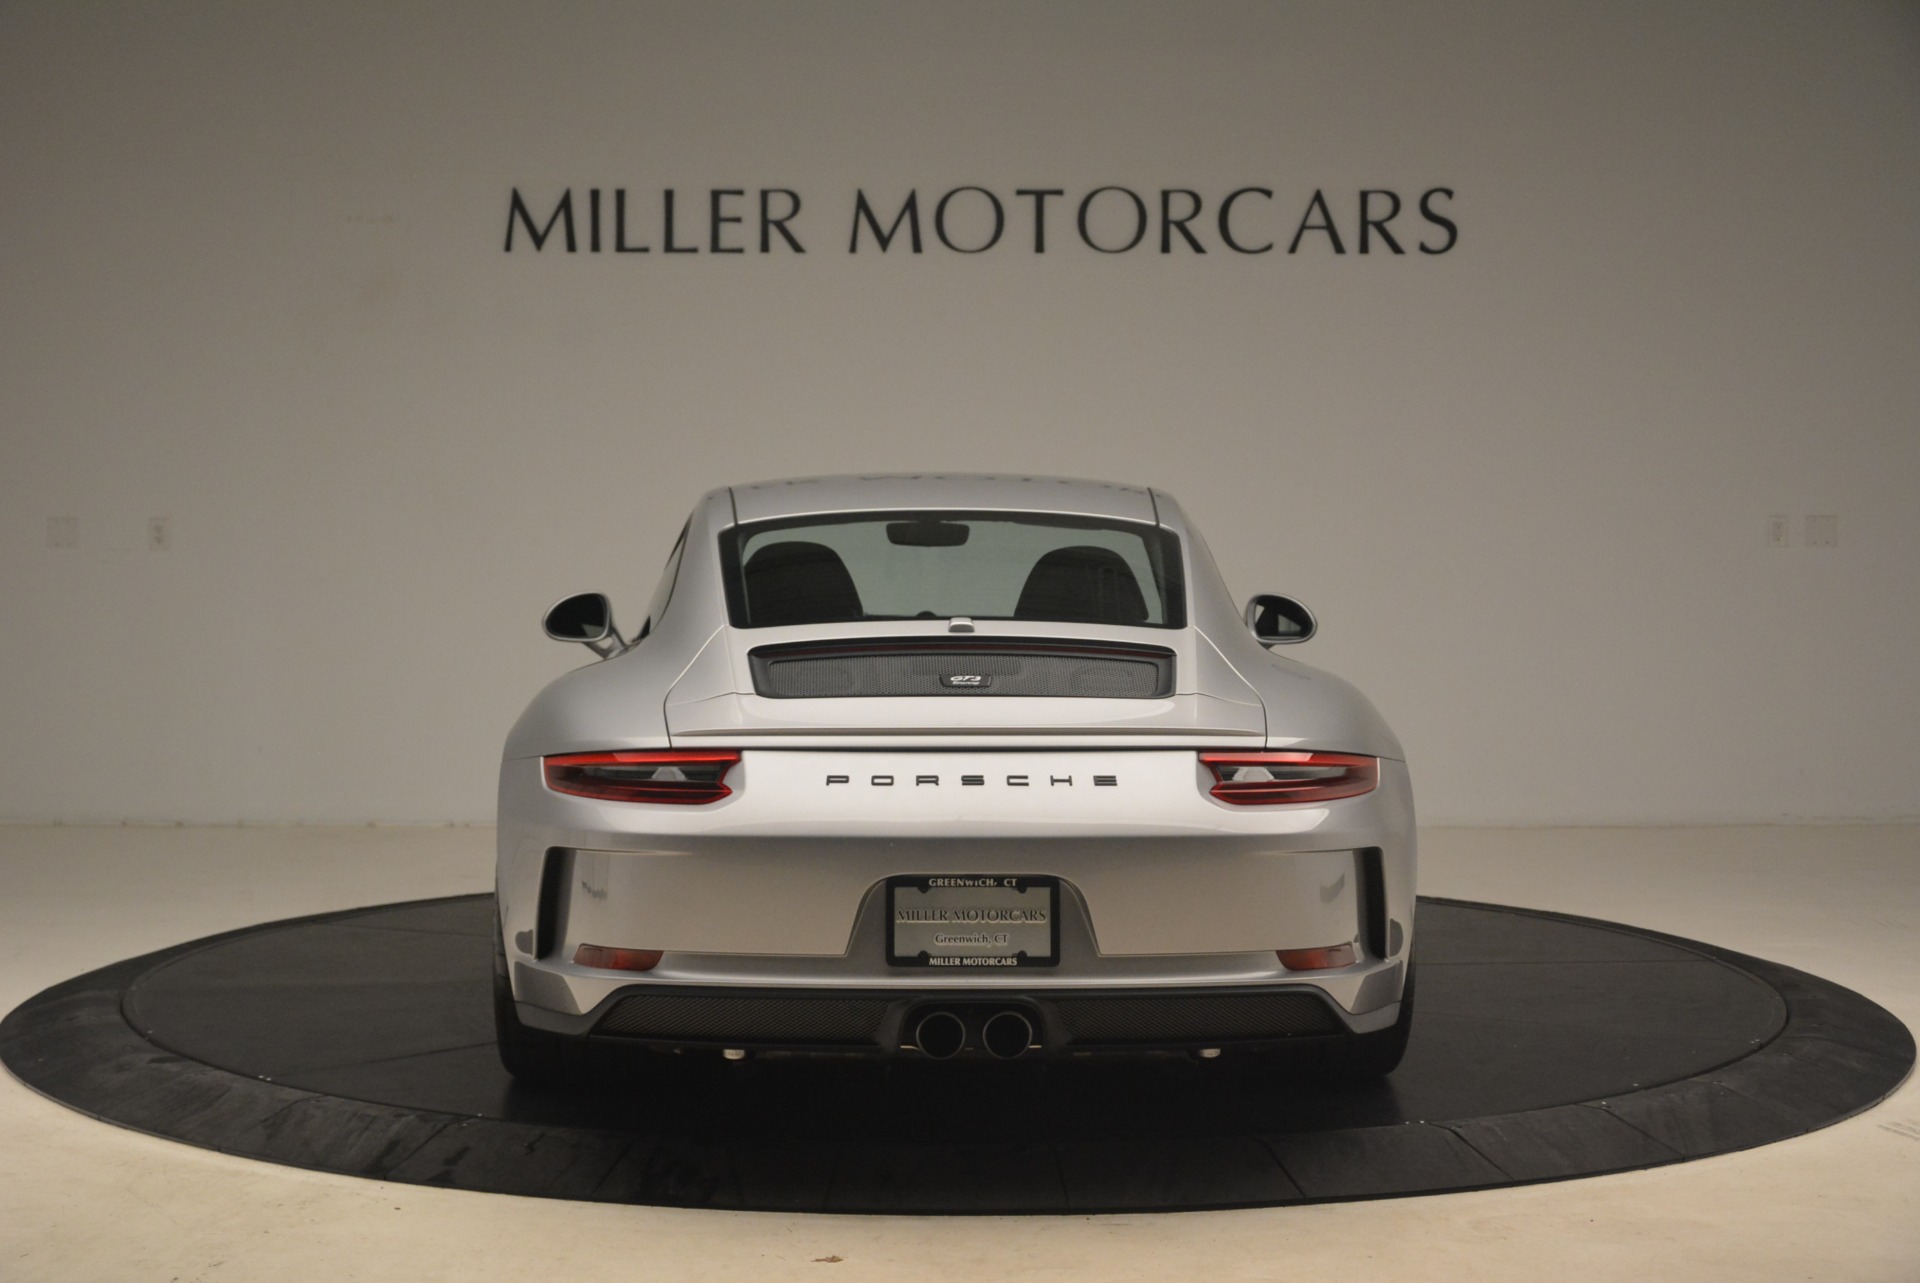 Pre Owned 2018 Porsche 911 Gt3 Touring For Sale Miller